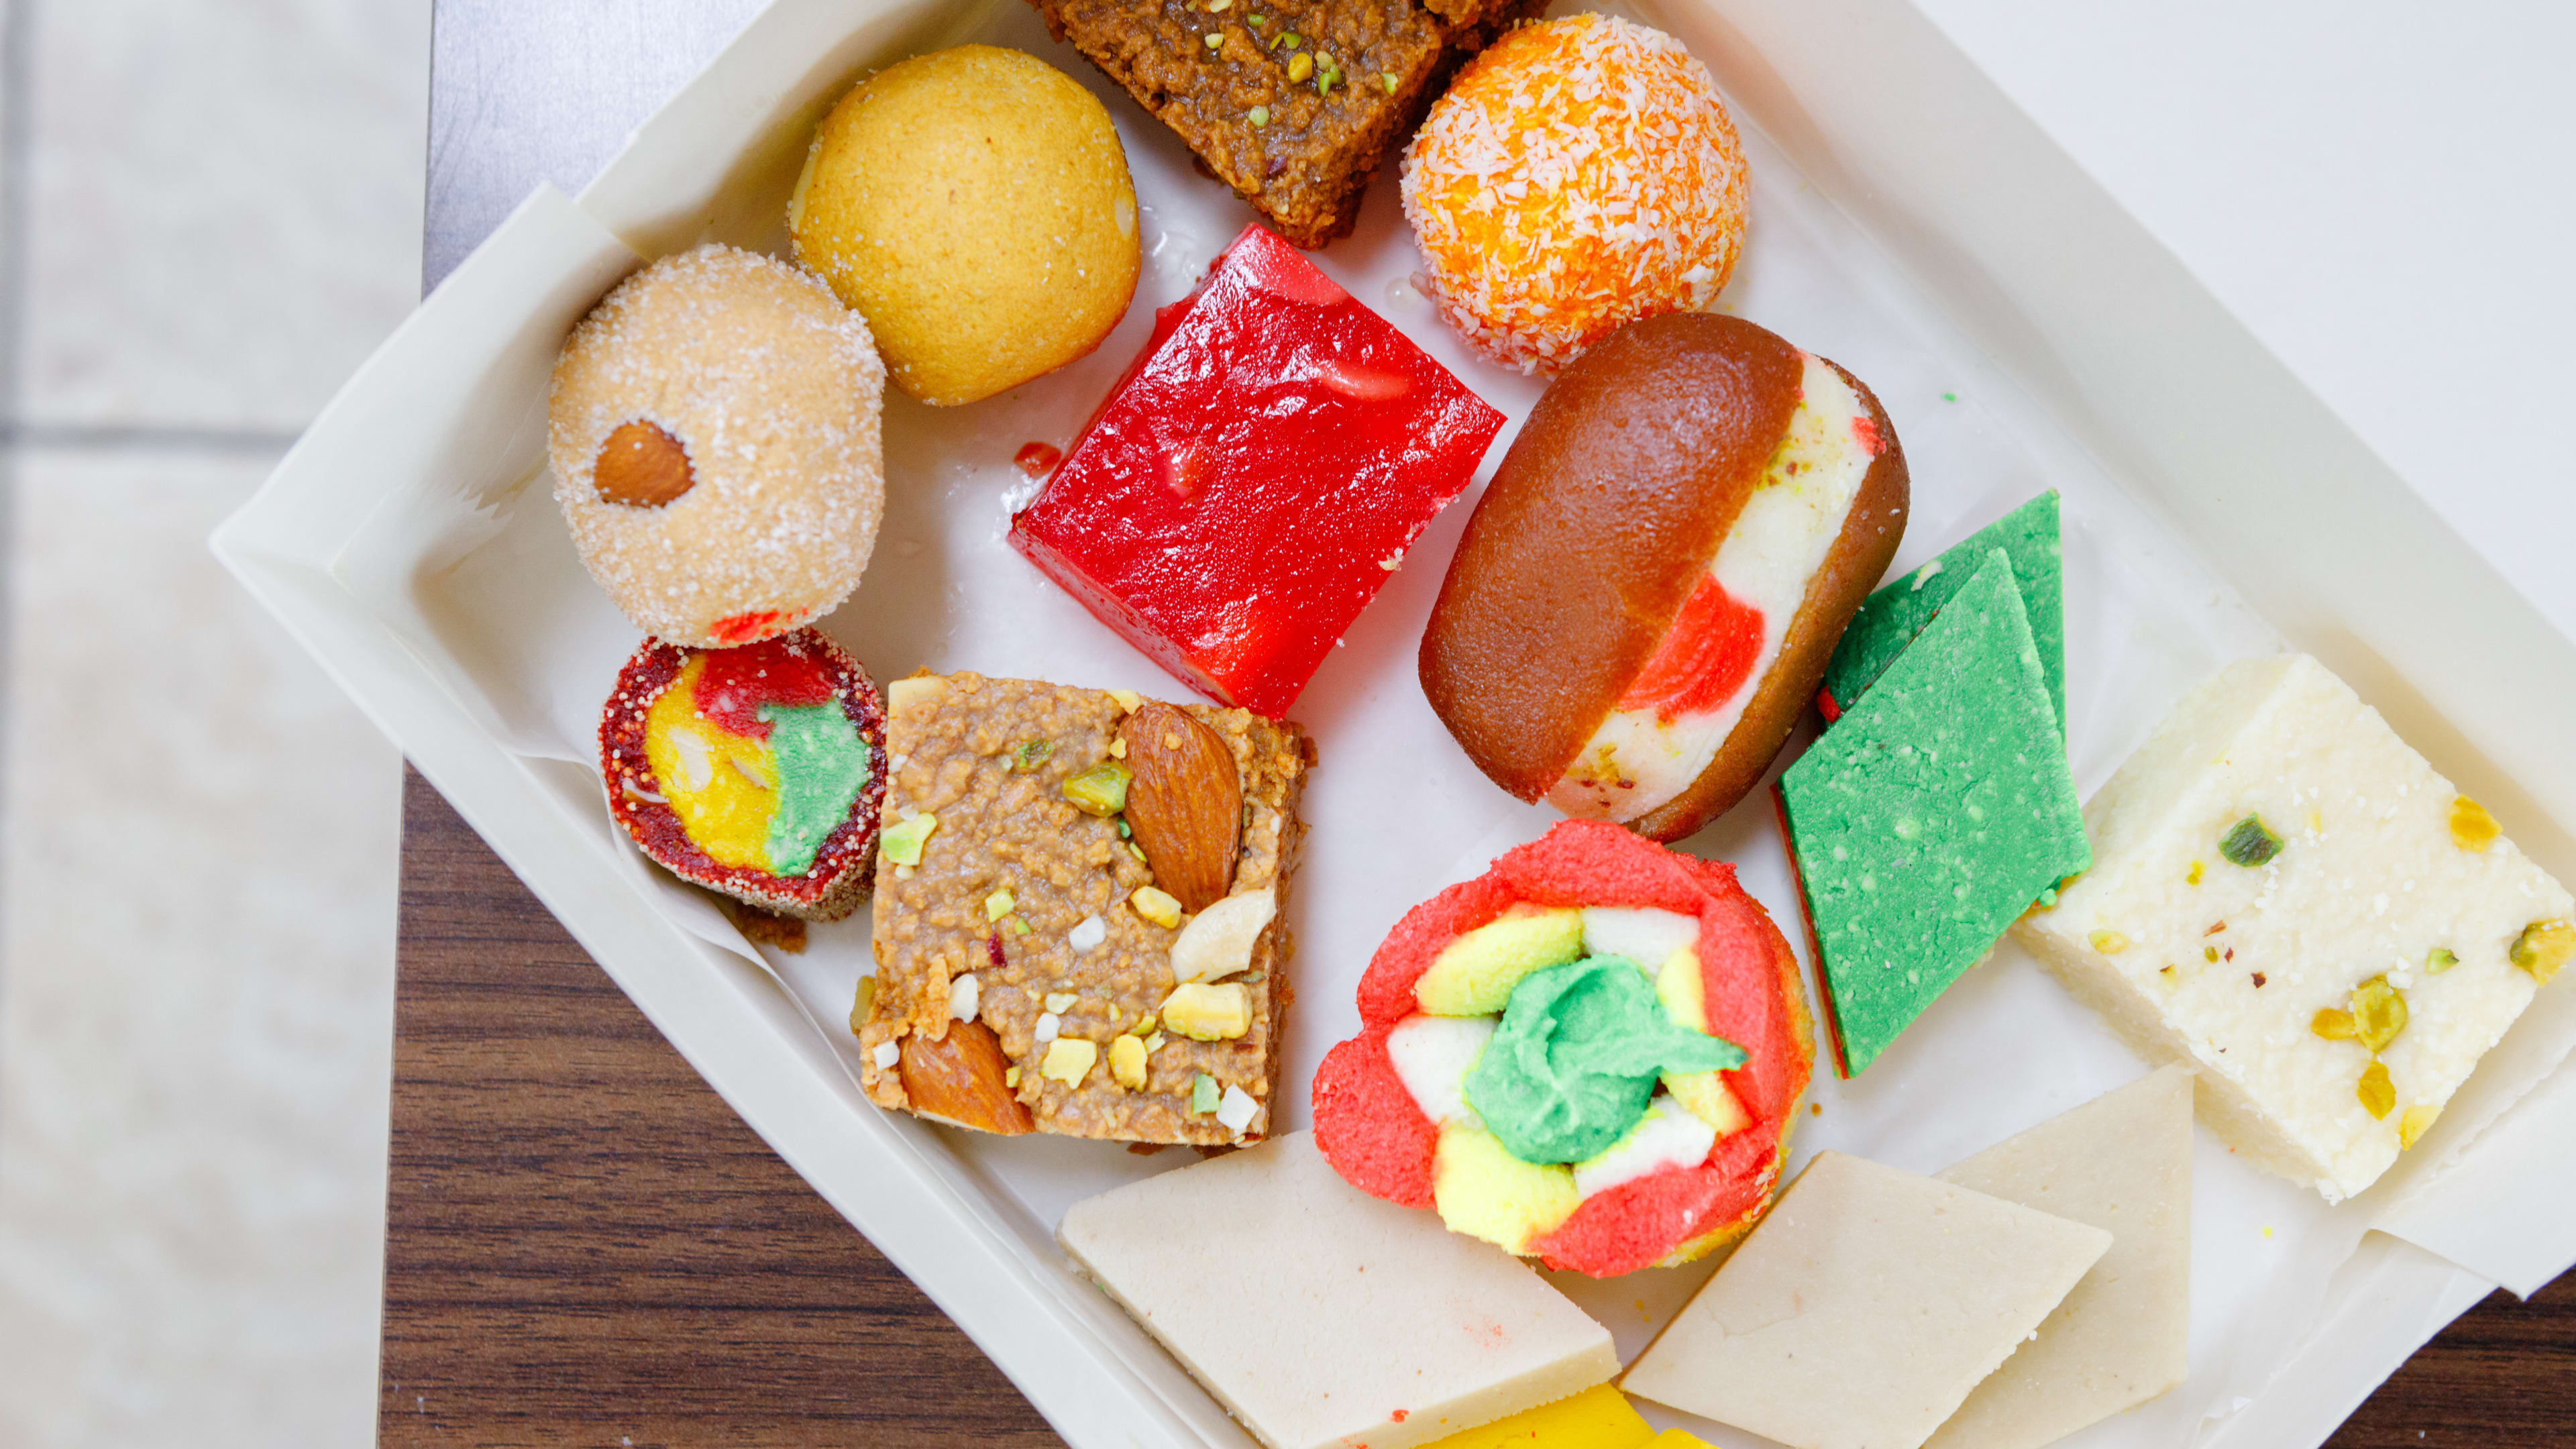 A box of desserts from Bombay Sweets.